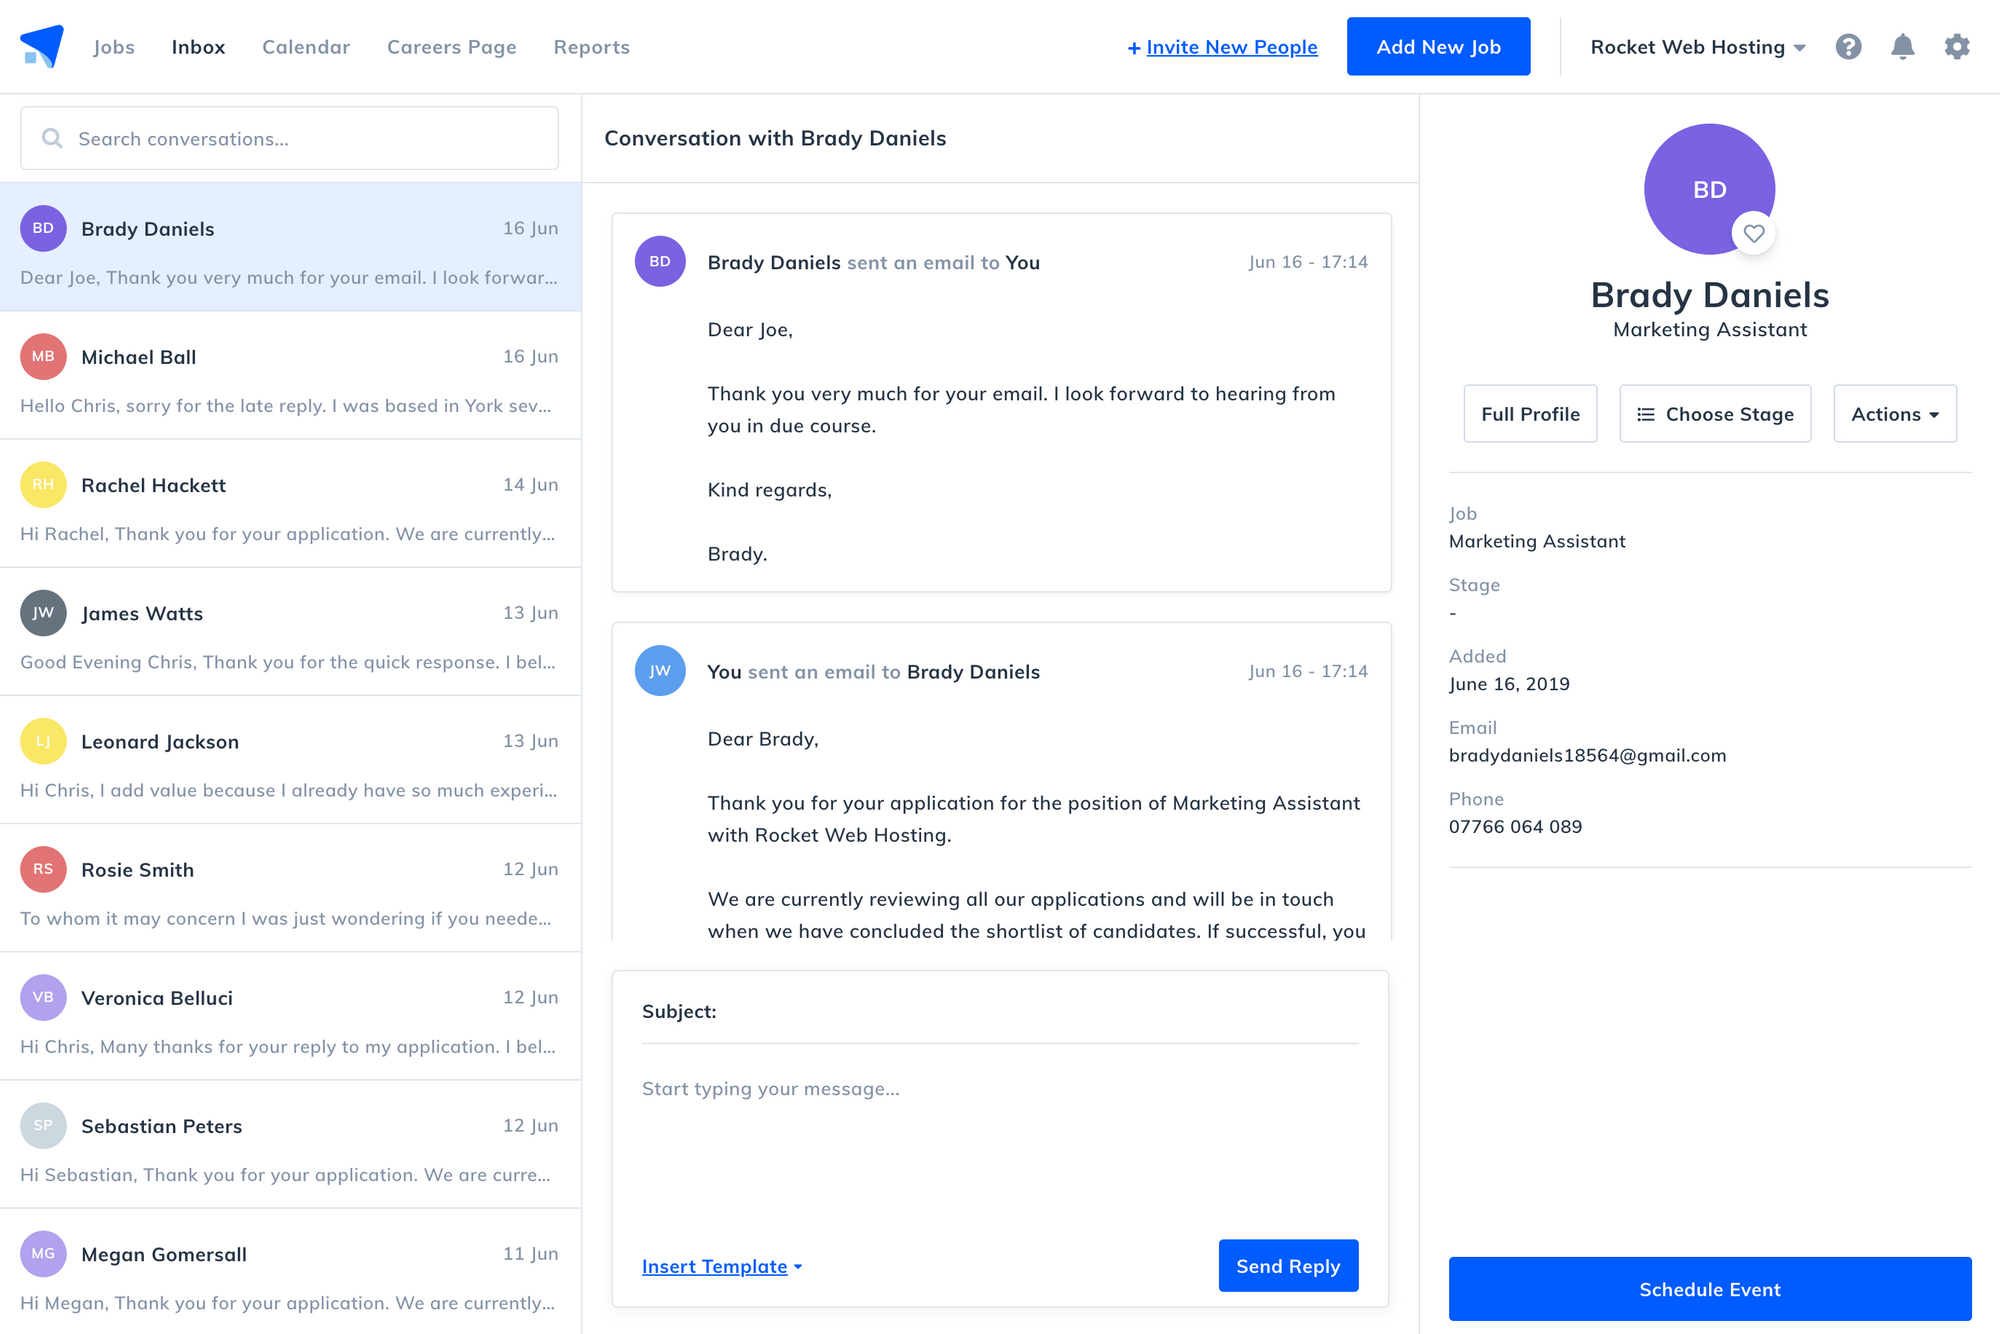 Meet 'Inbox' - A New Way to Manage Communication with Candidates 💬